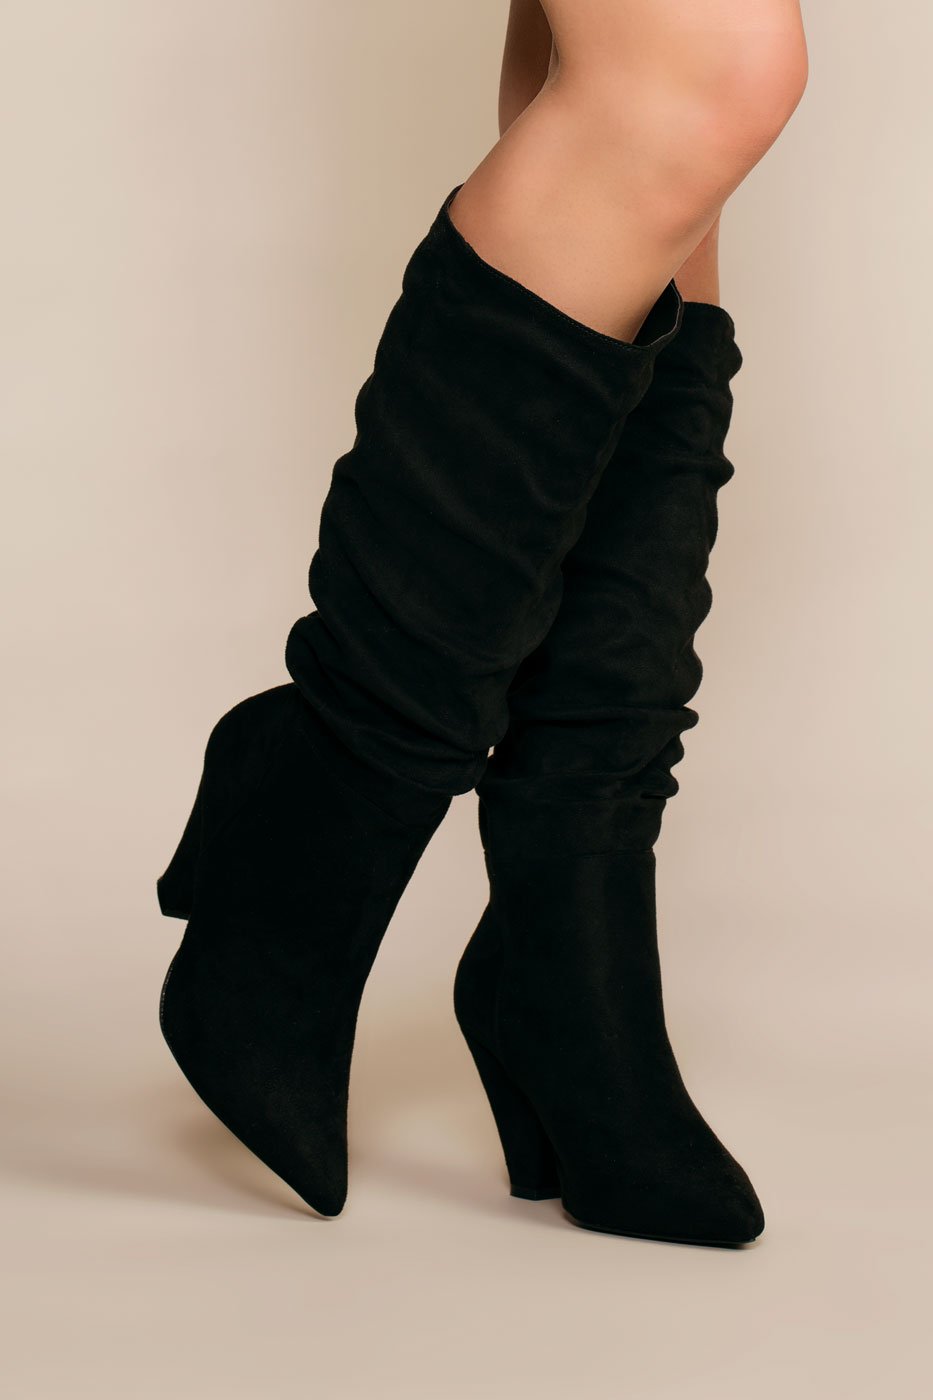 Boots - Cassie Pointy Toe Slouchy Boots